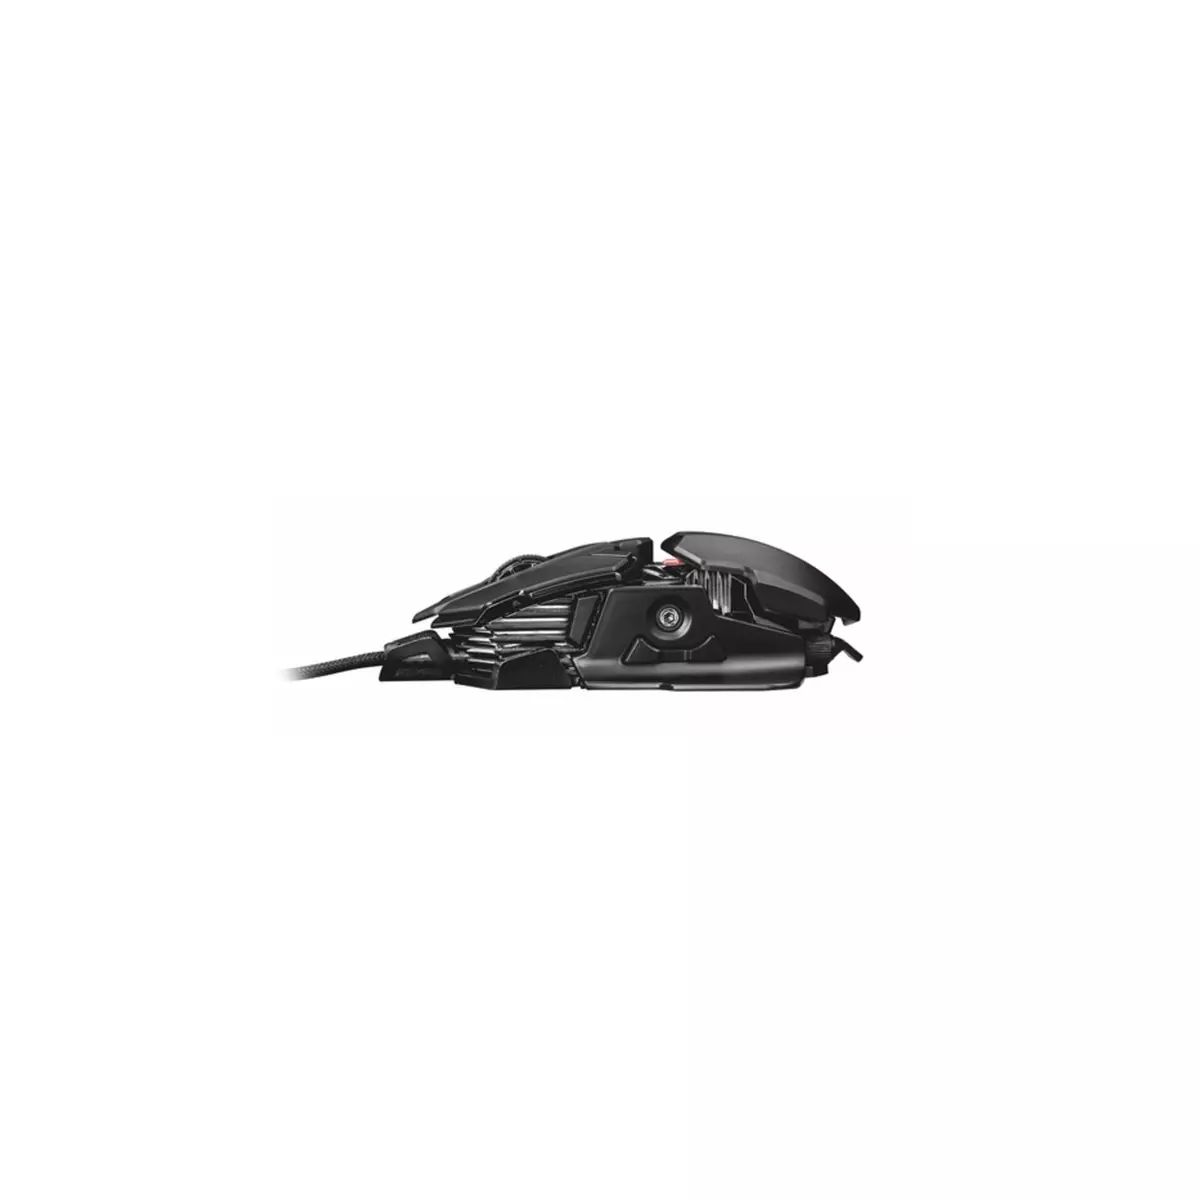 TRUST Souris - Gaming - Filaire - GXT 138 X-Ray